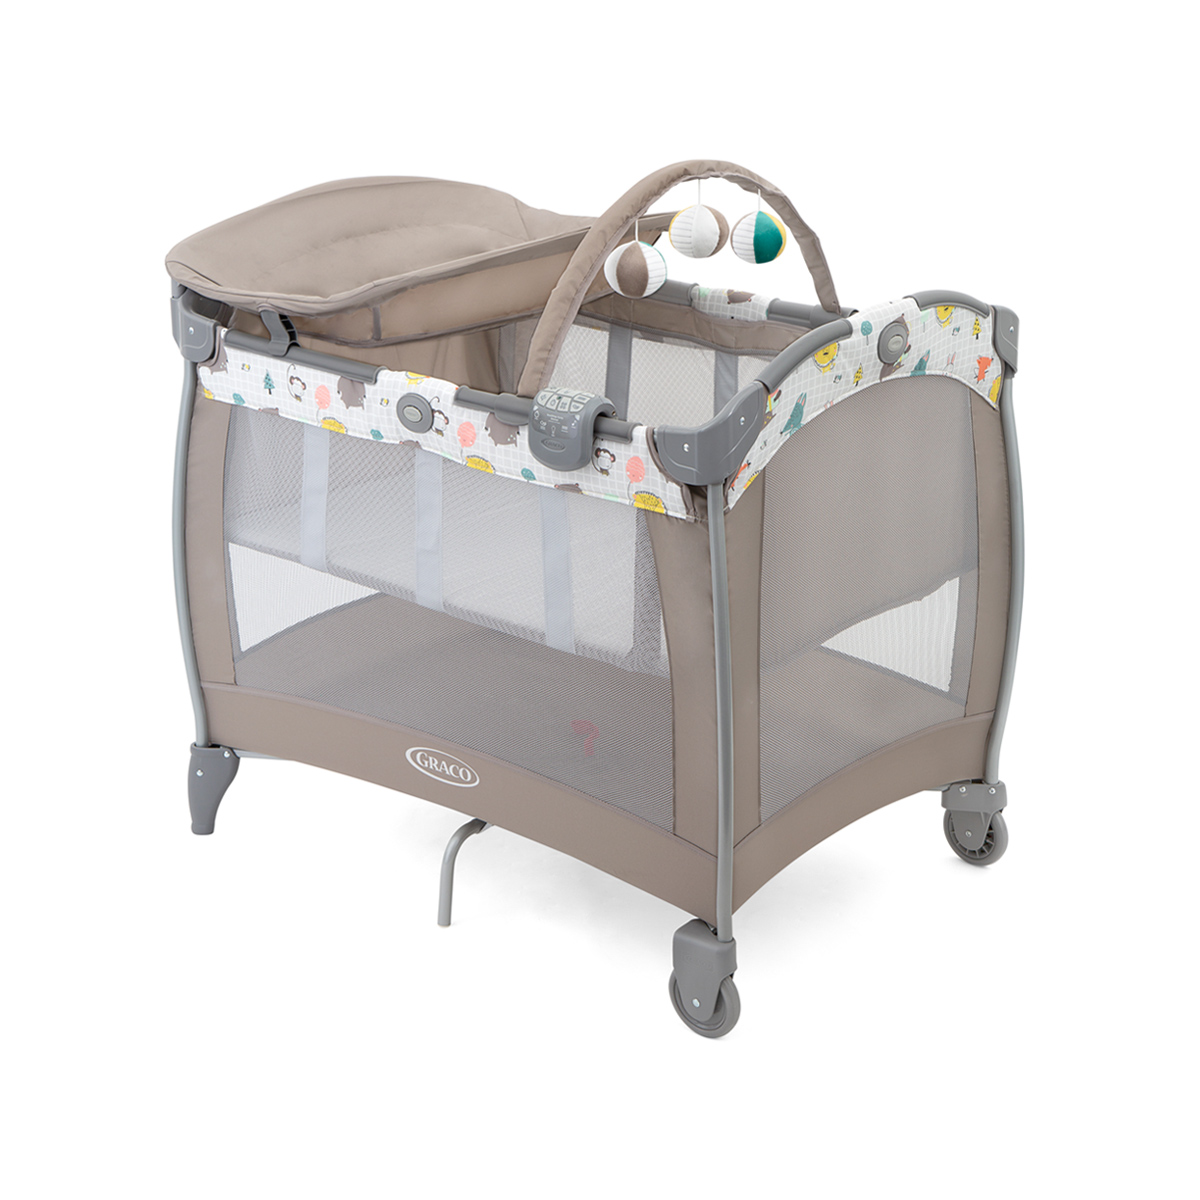 Graco Contour® Electra with removable bassinet and changing table three quarter angle